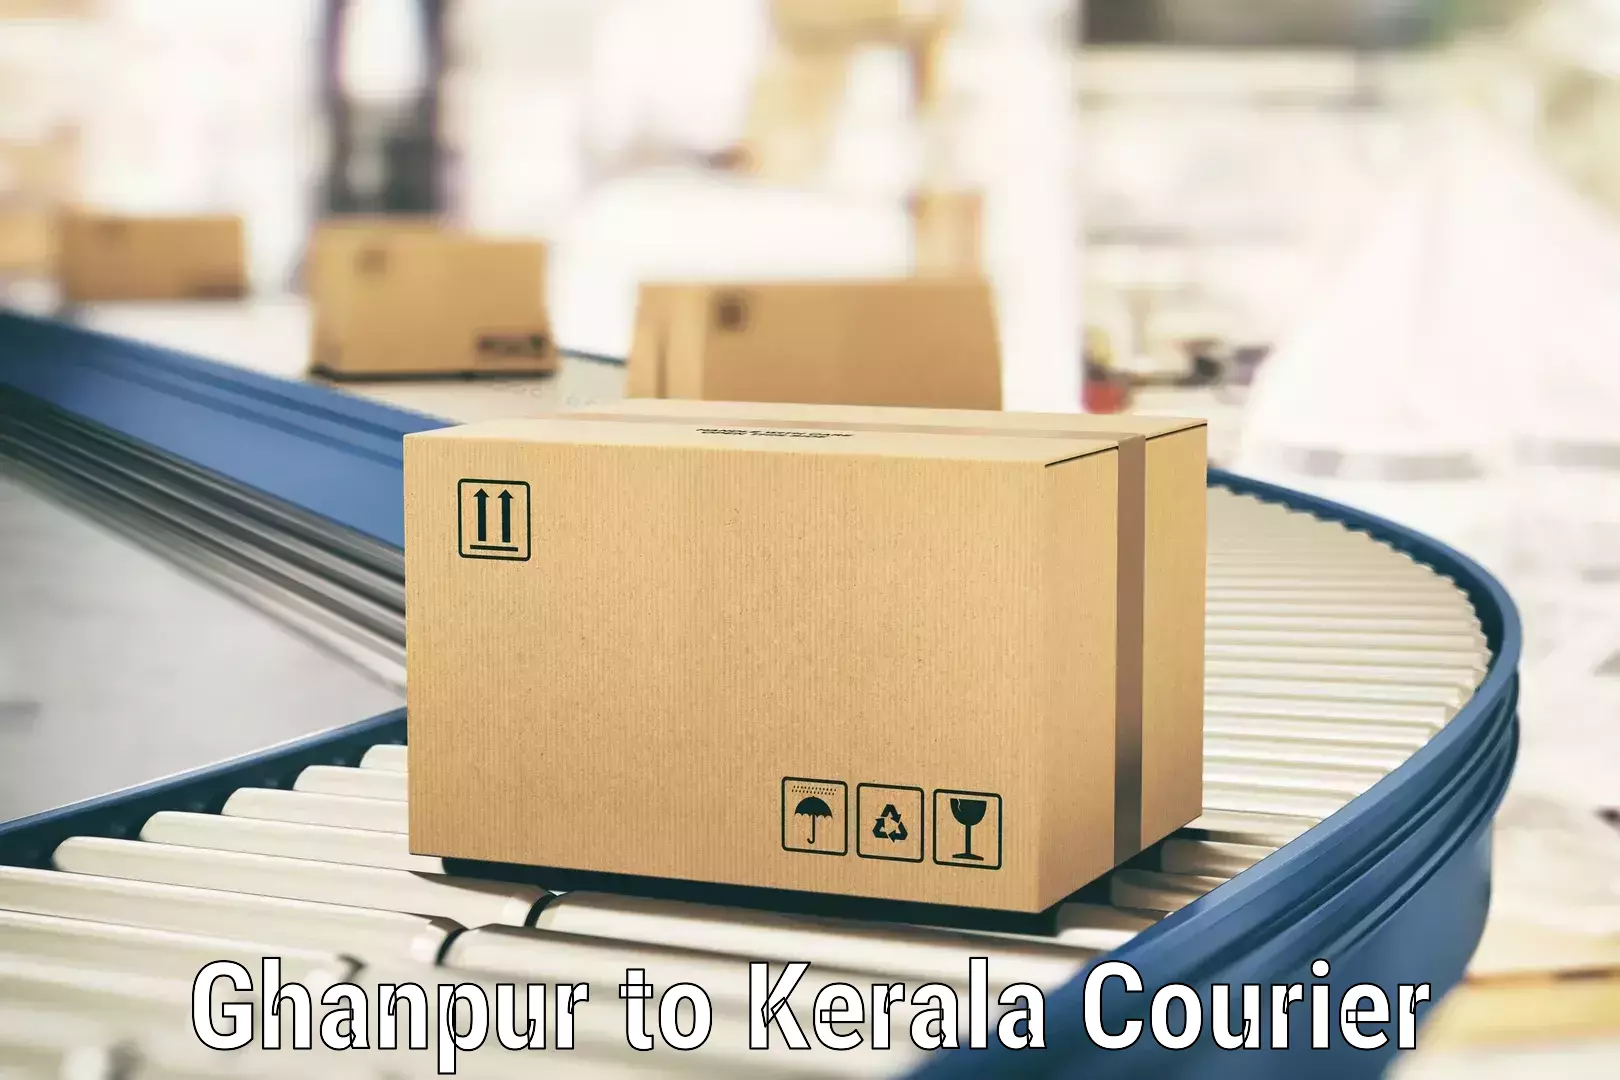 Quality courier partnerships Ghanpur to Thodupuzha